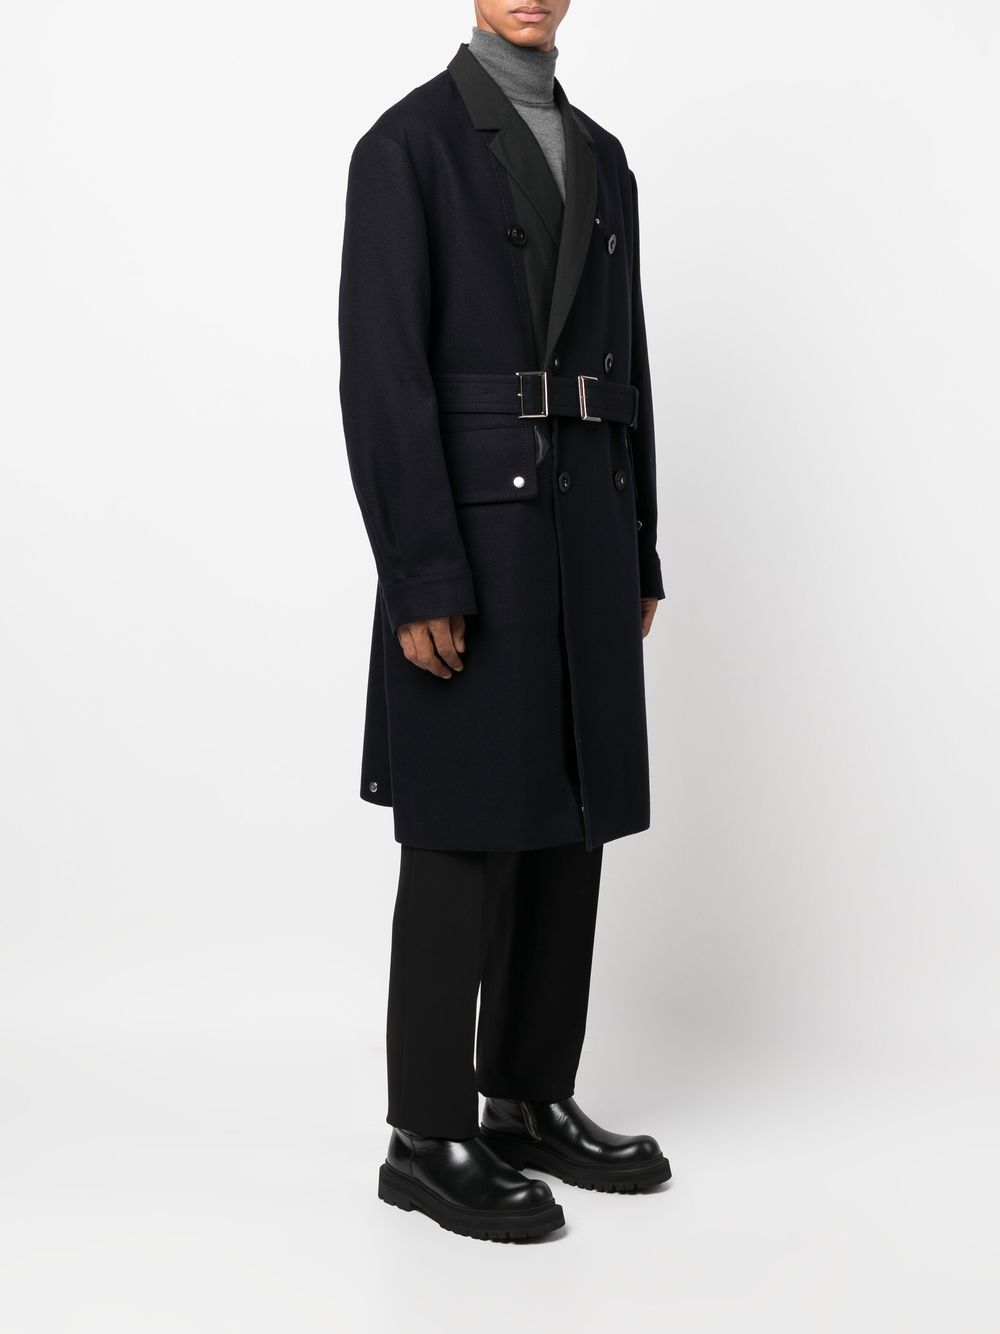 Sacai Belted double-breasted Wool Coat - Farfetch